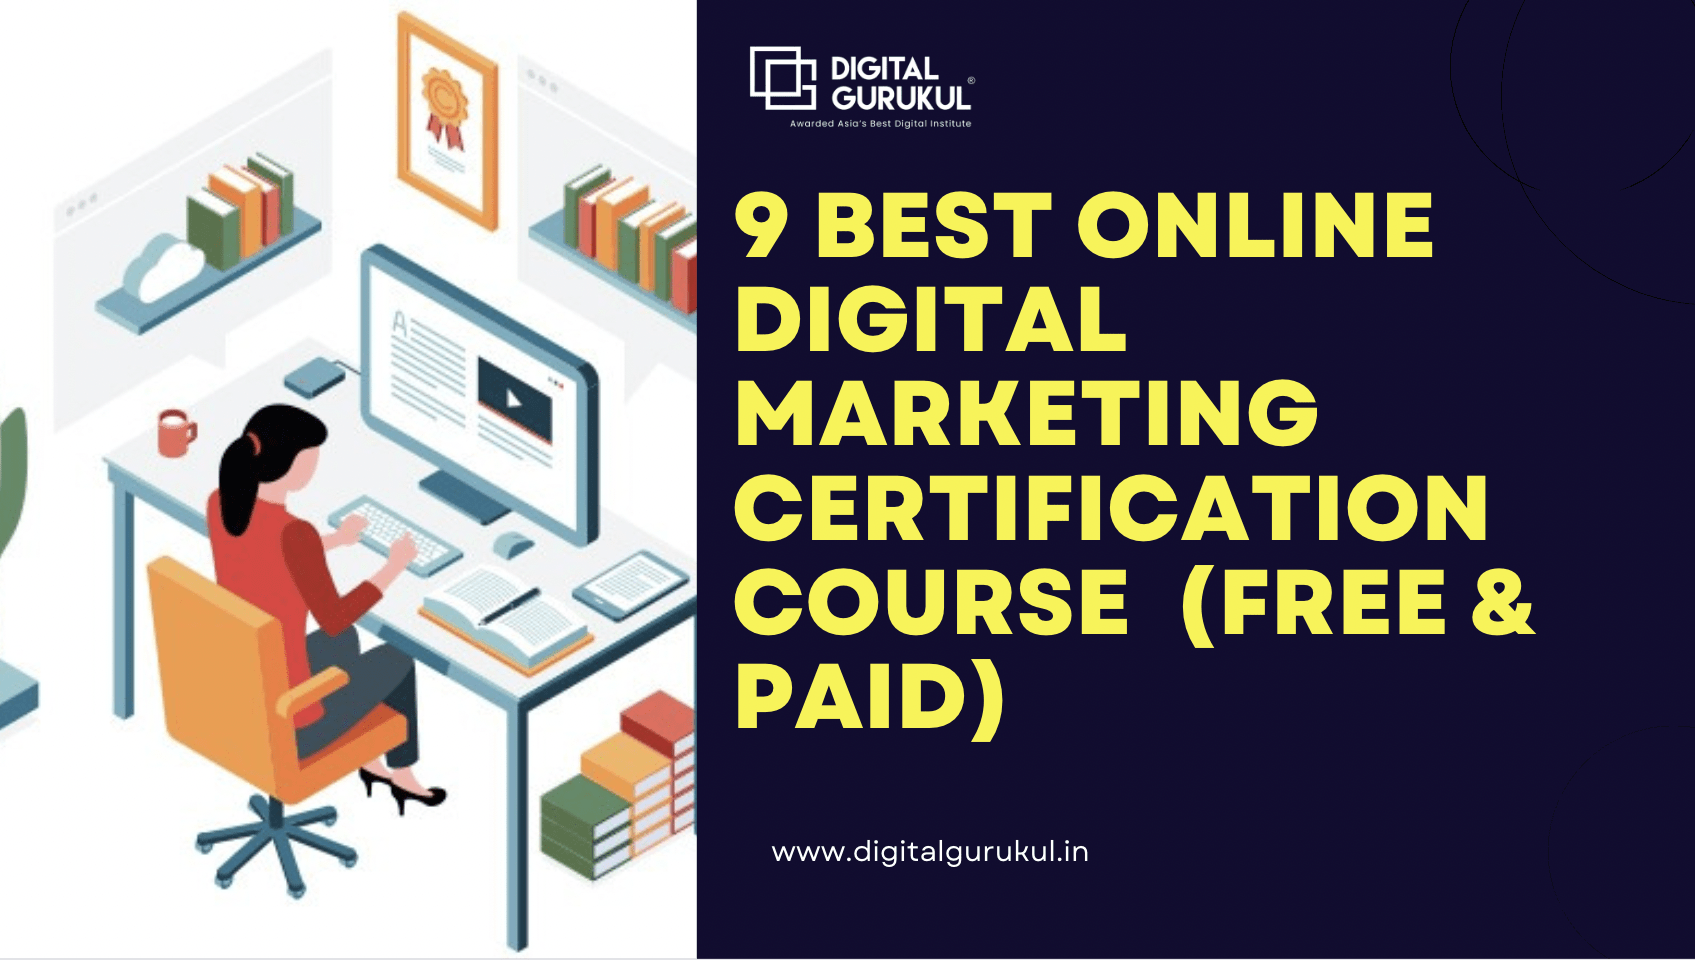 9 Best Online Digital Marketing Certification Course (Free & Paid)